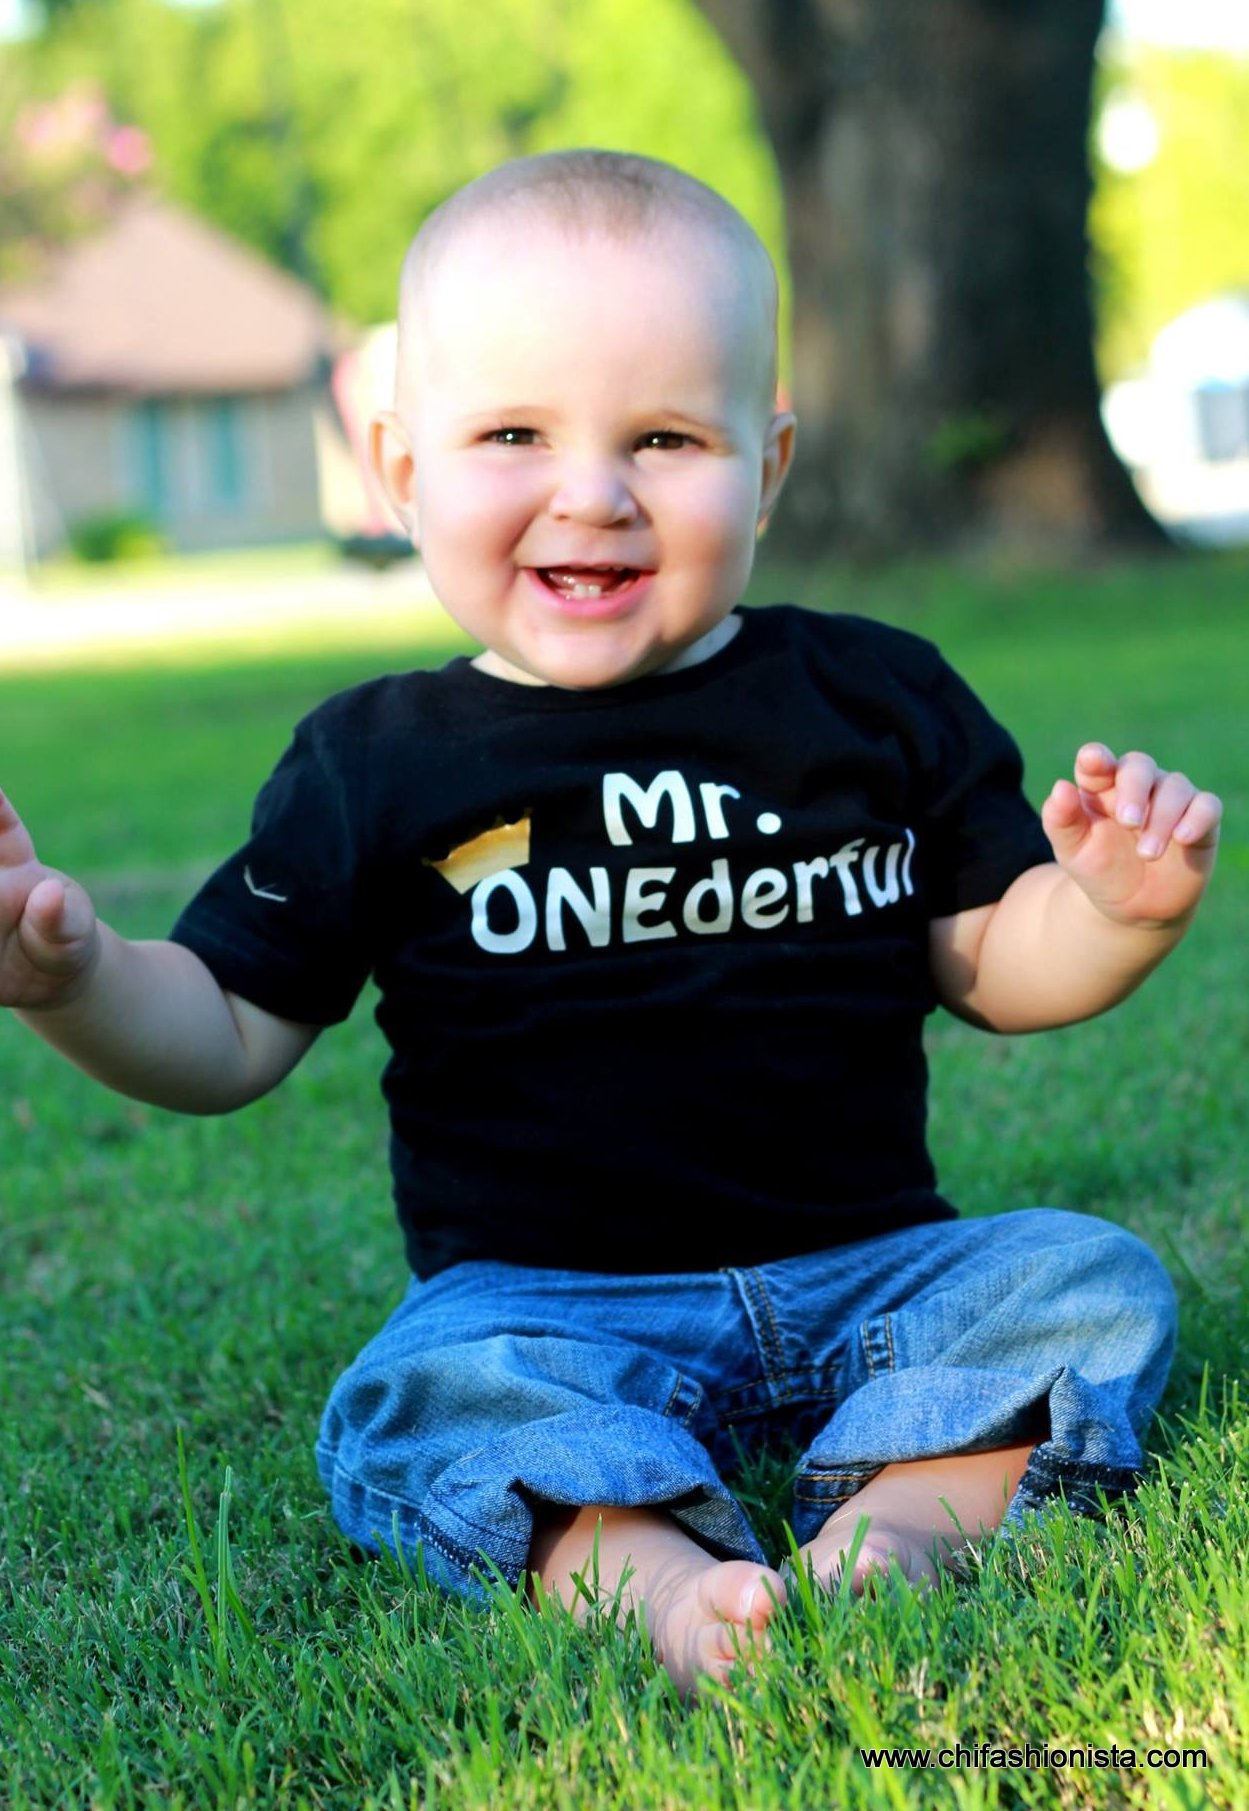 Handcrafted Children's Clothing, Clothing for Children and Parents, Mr. Onederful- First Birthday Shirt, chi-fashionista